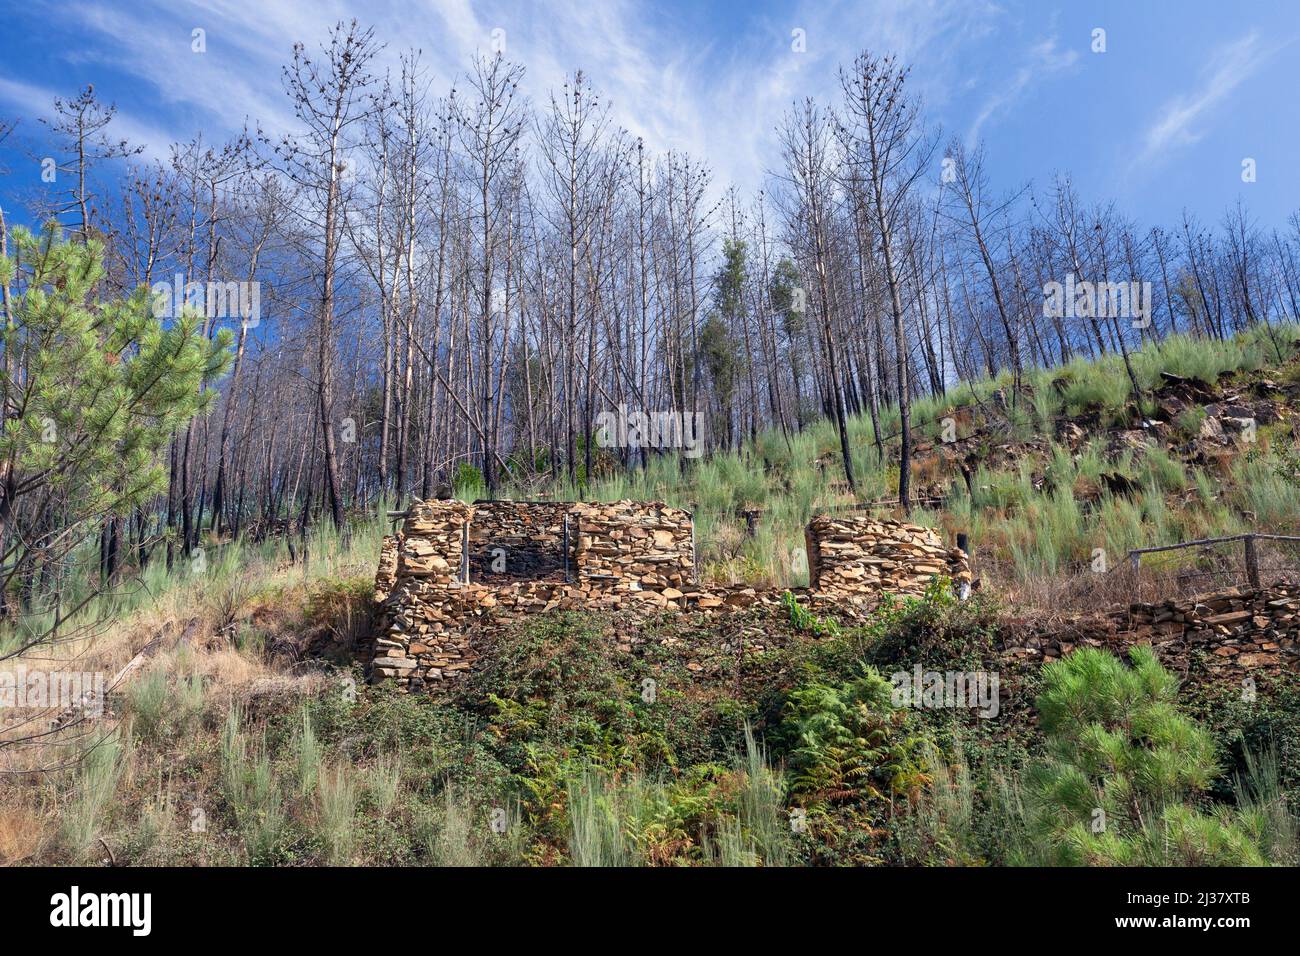 Europe, Portugal, District of Coimbra, Near Góis, 'The Goatshed' Ruins (near Colmeal) below scorched Pine Trees on Hillside after the devastating Stock Photo